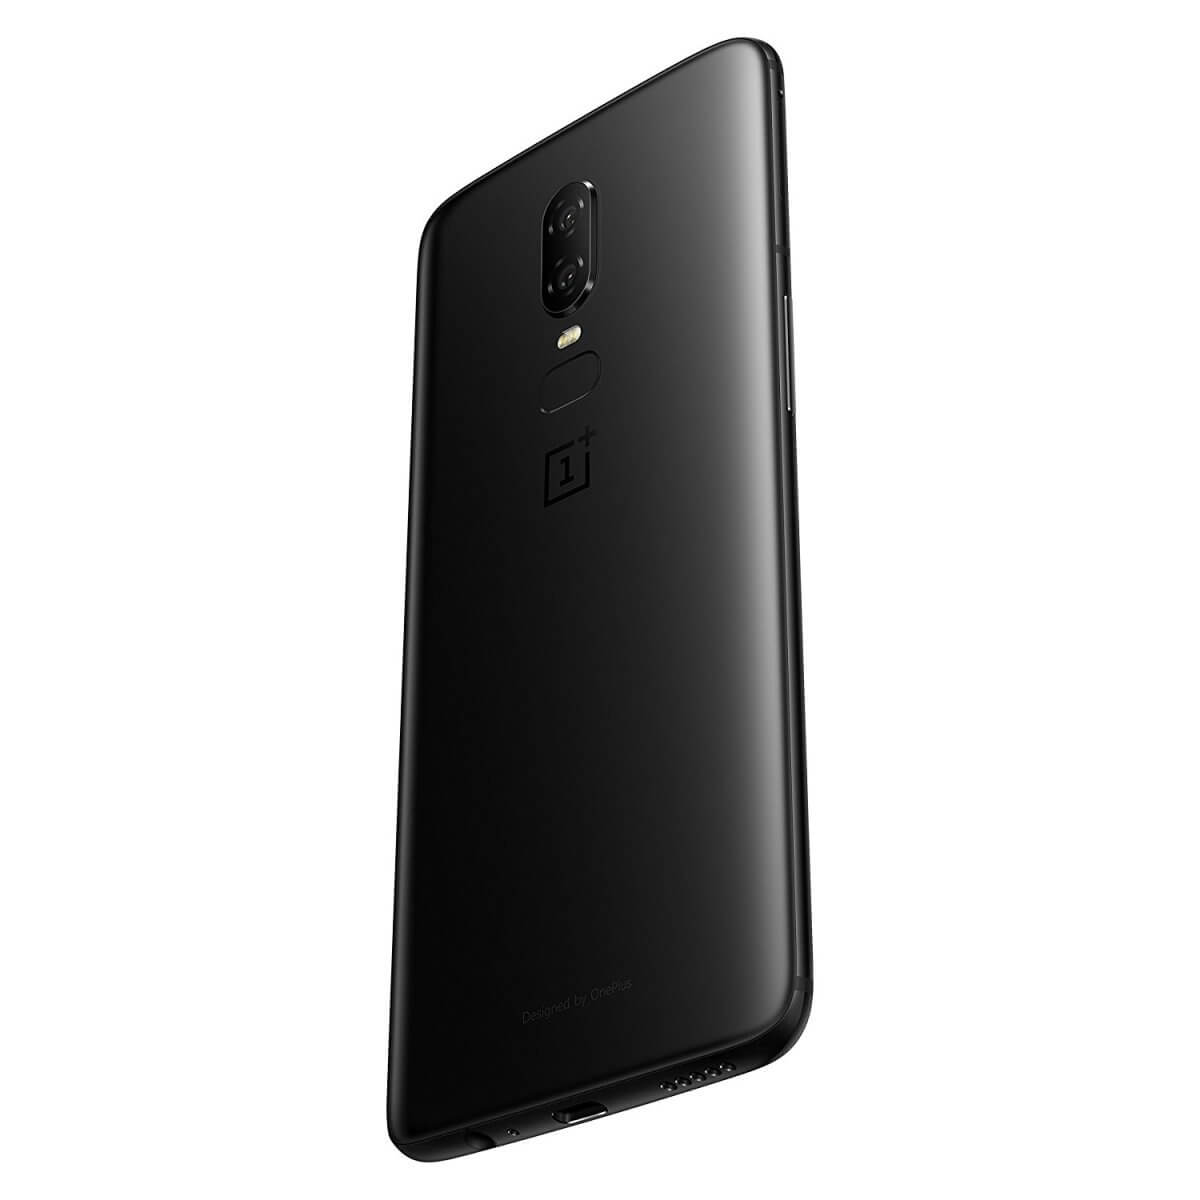 Oneplus 6 release date in china